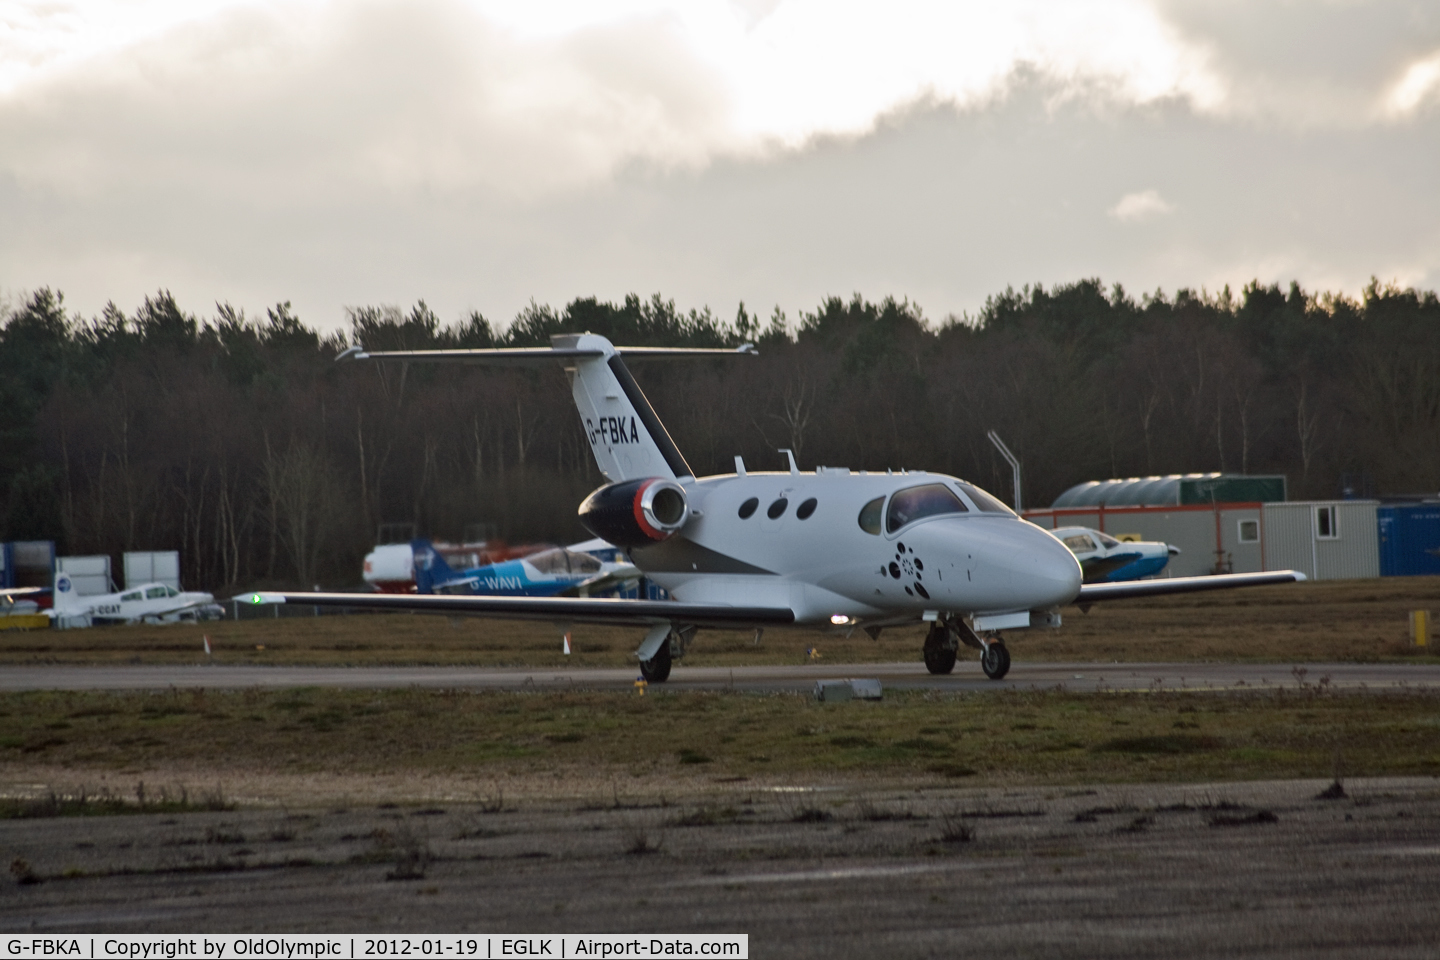 G-FBKA, 2008 Cessna 510 Citation Mustang Citation Mustang C/N 510-0096, Taxying for take-off RW25